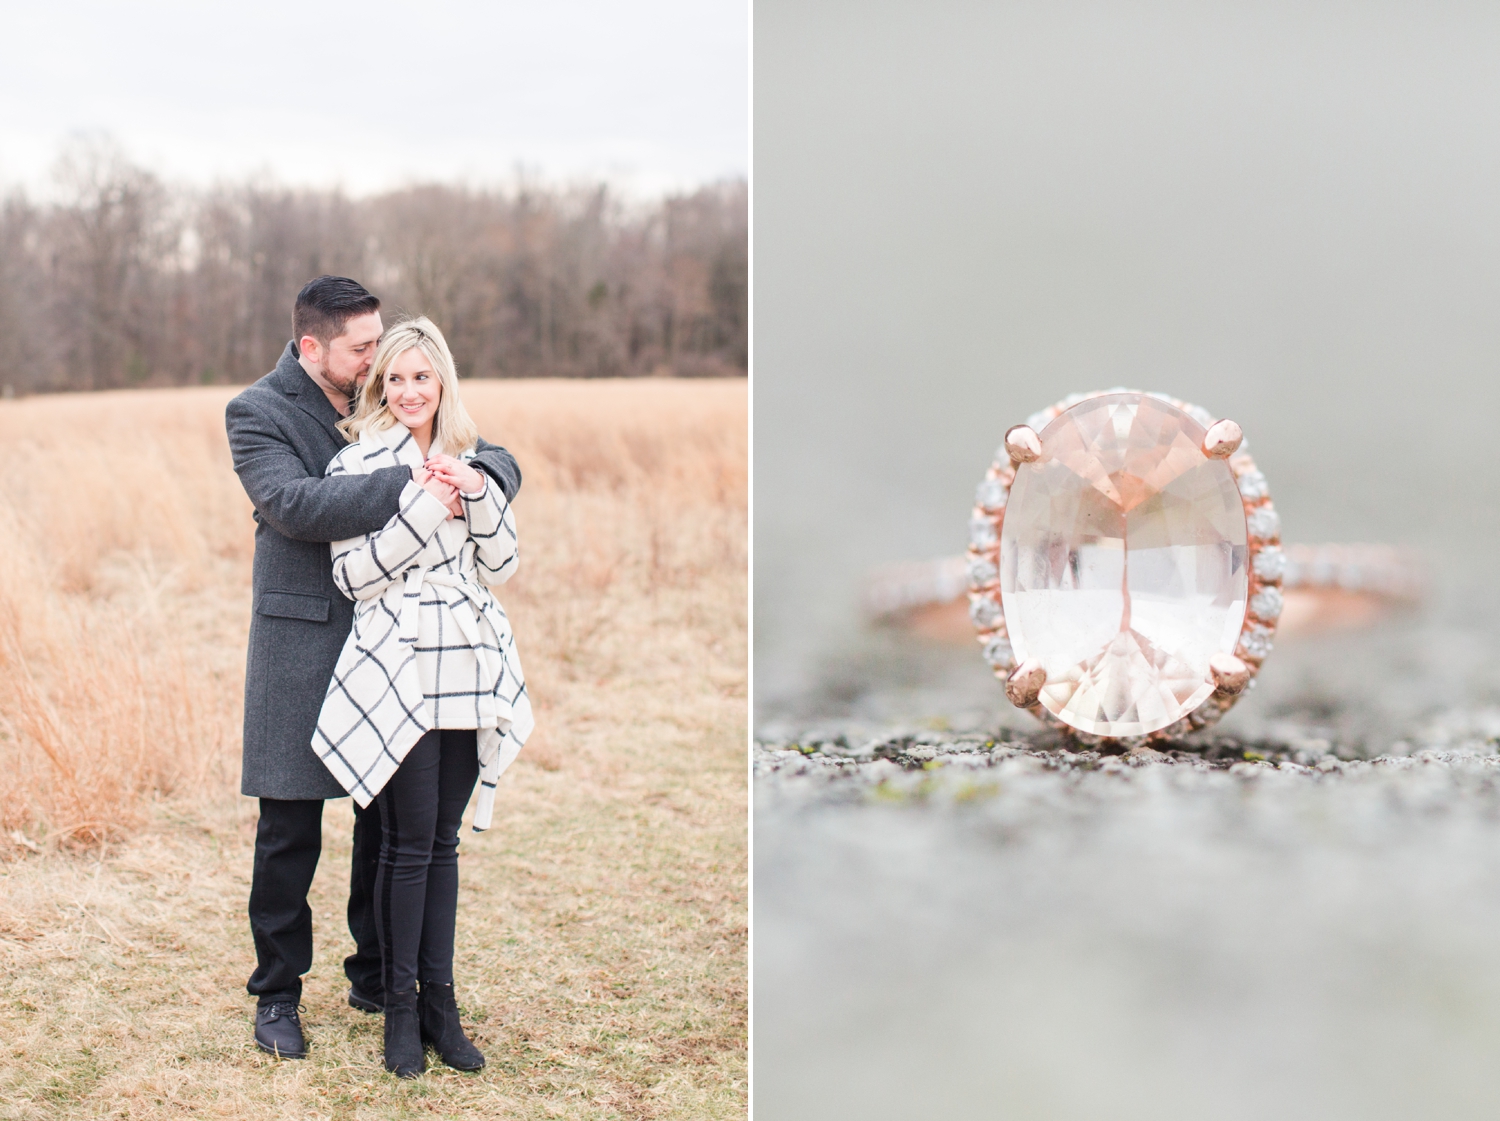 waveny-park-engagement-session-new-canaan-connecticut-photographer-shaina-lee-photography-photo